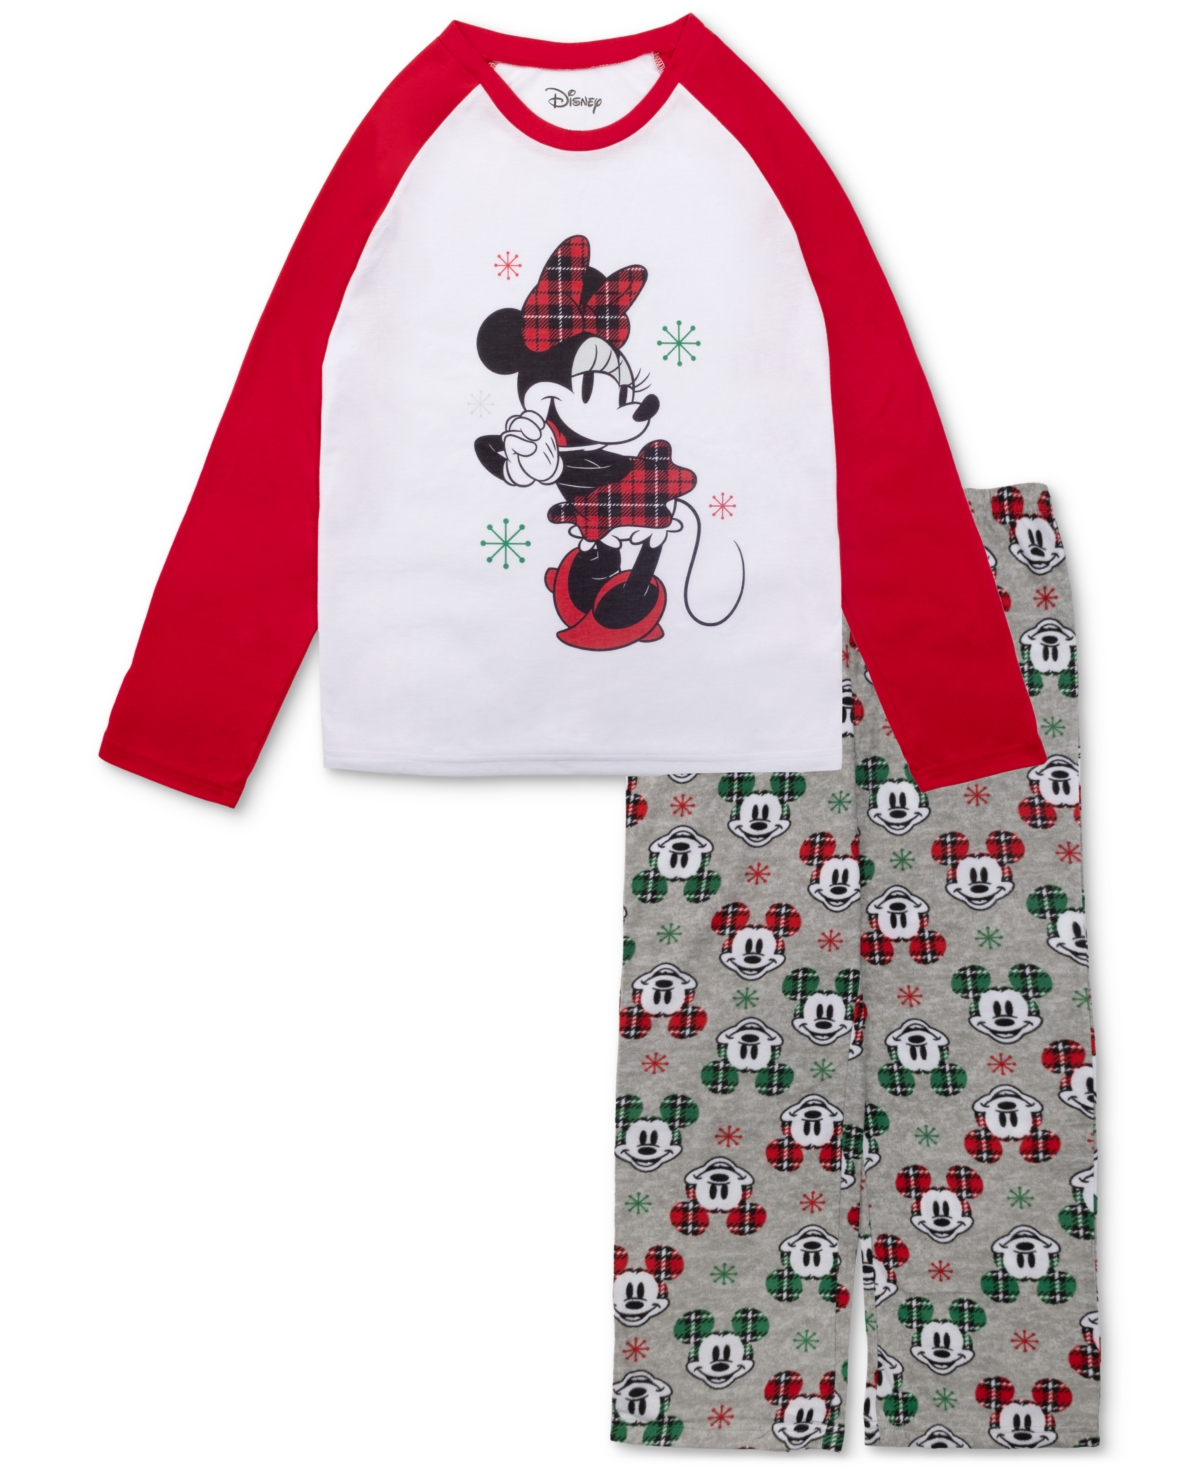 Matching Women's Minnie Mouse Pajamas Set - Red